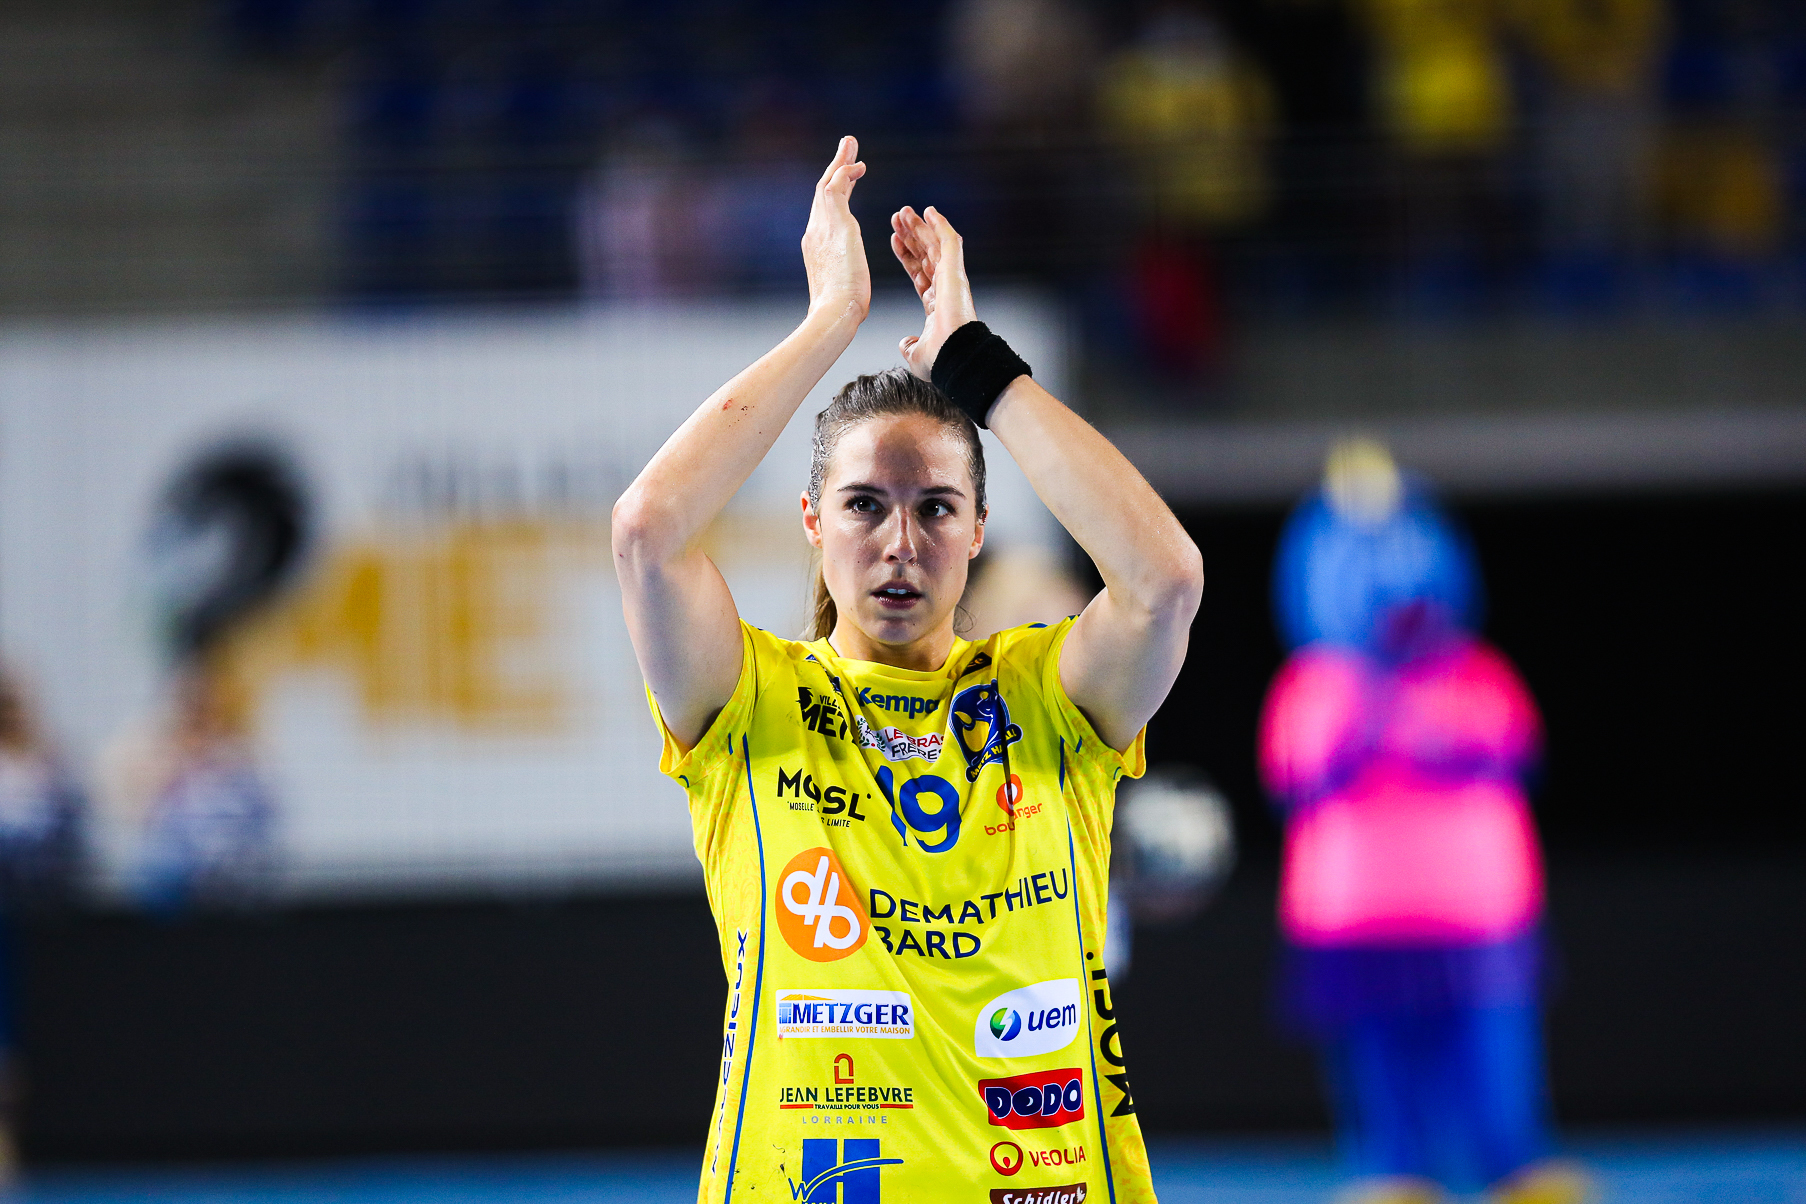 Louise Burgaard of Metz Handball during the EHF Women's Champions League match between Metz and Gyori on October 23, 2021 in Metz, France. (Photo by Bertrand Delhomme/Icon Sport) - Louise BURGAARD - Metz (France)